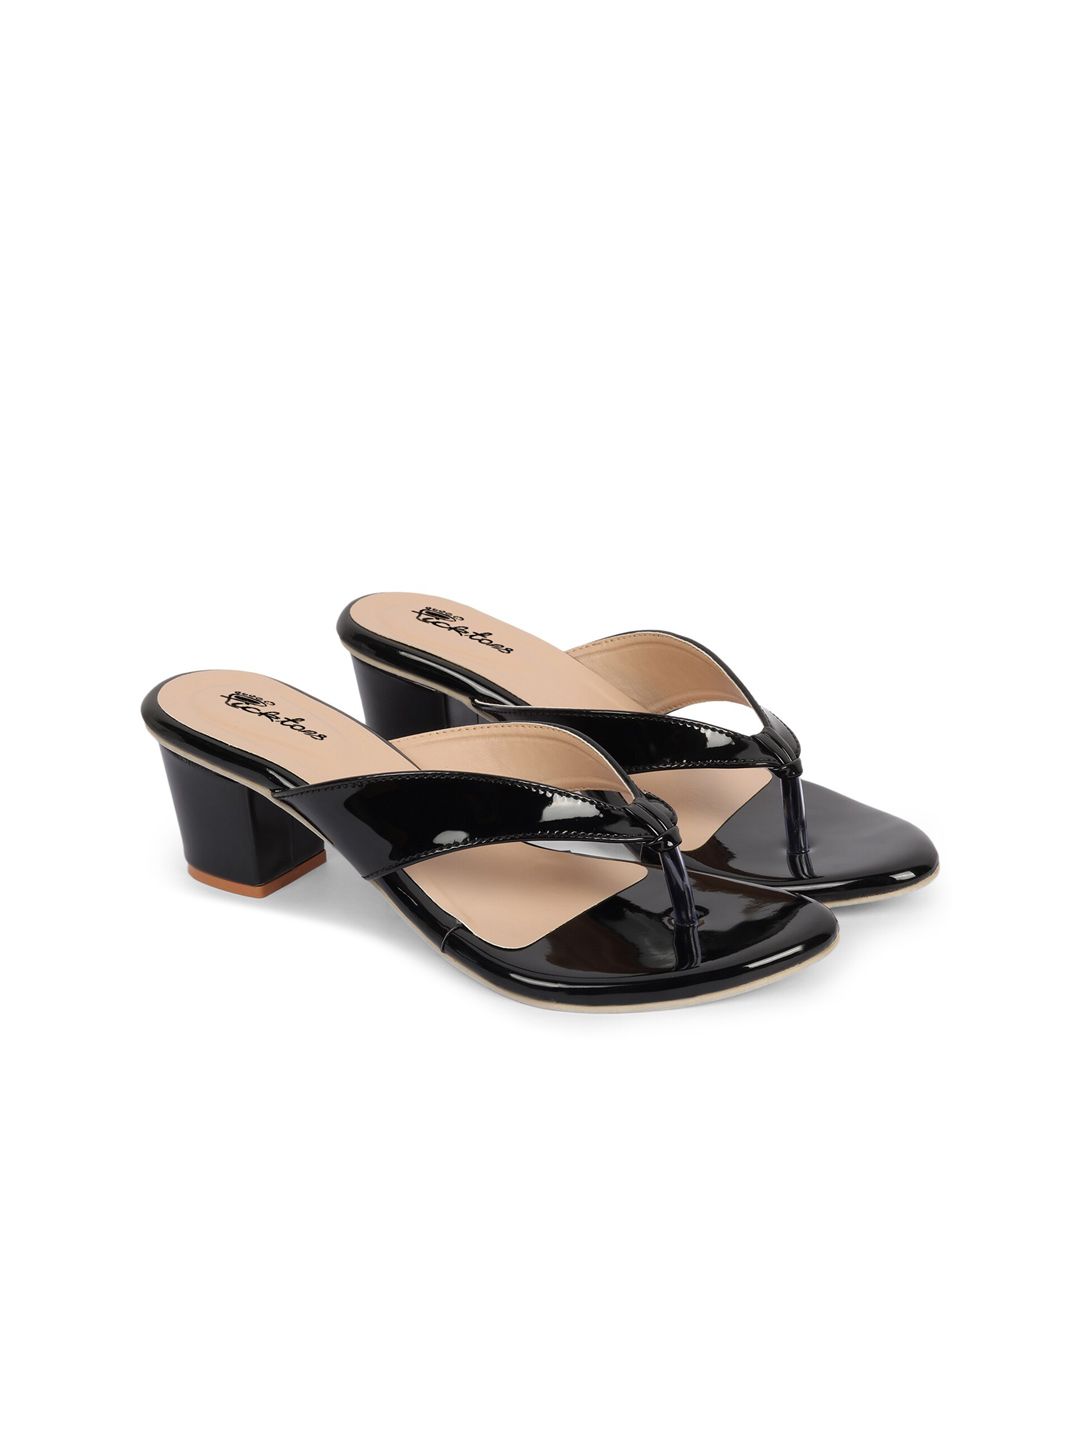 Picktoes Black Block Sandals with Laser Cuts Price in India